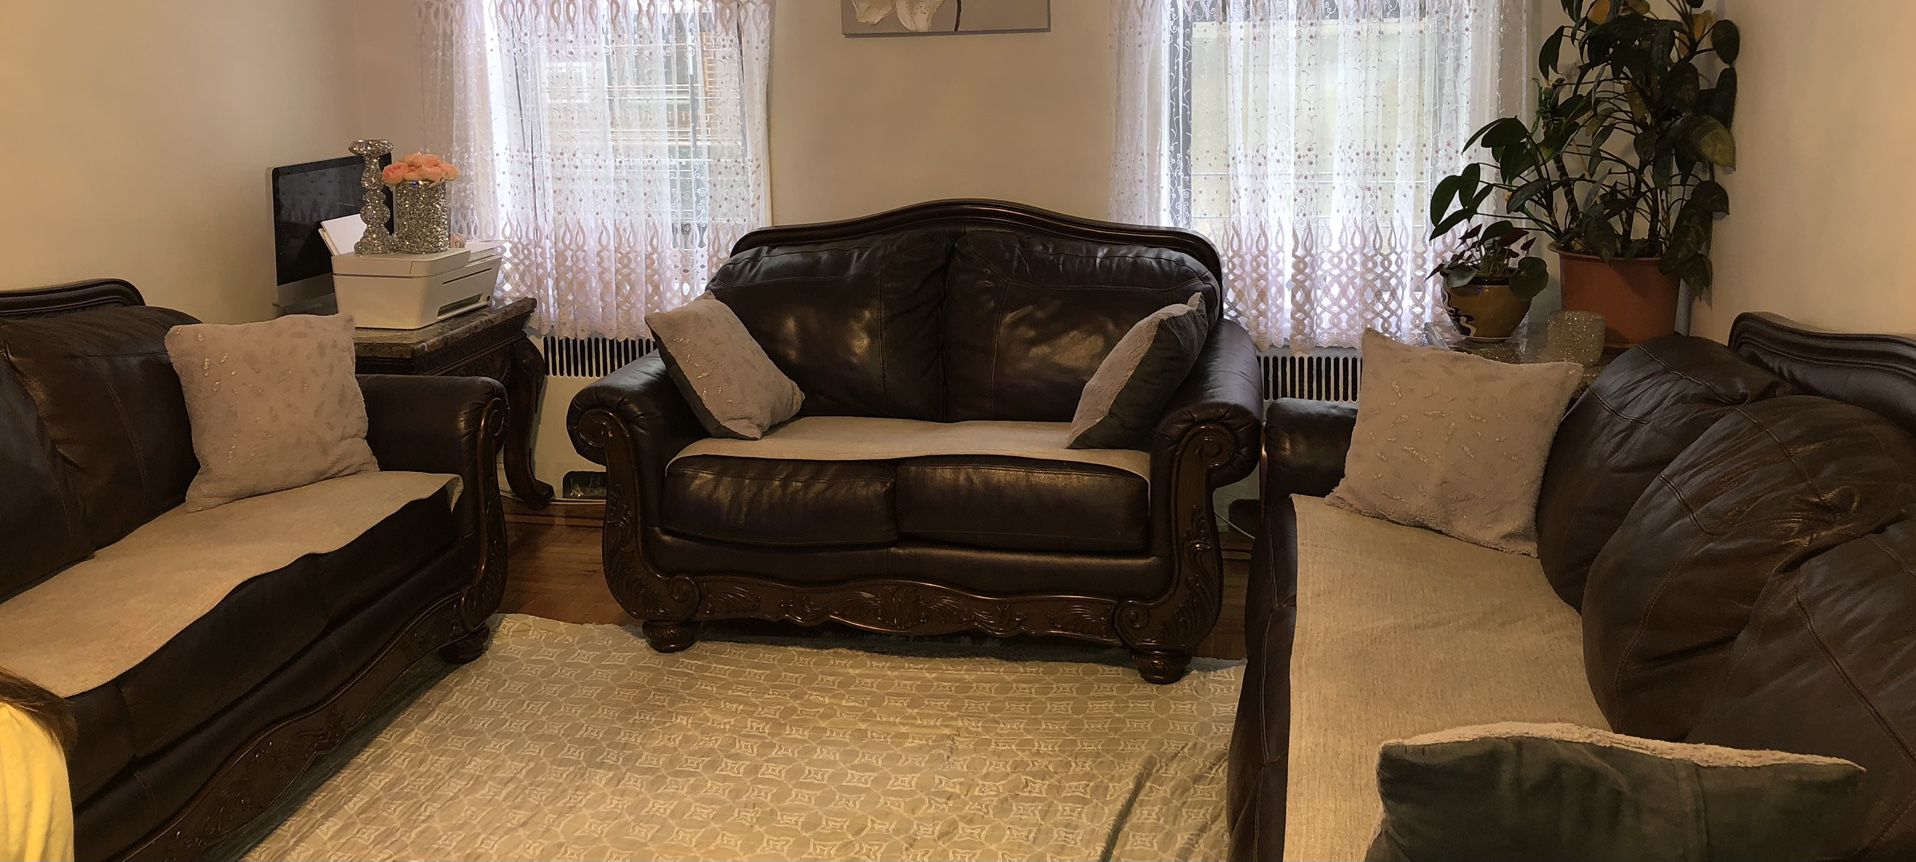 Leather Couches. Can Sell Set Of 3 Or Seperatly